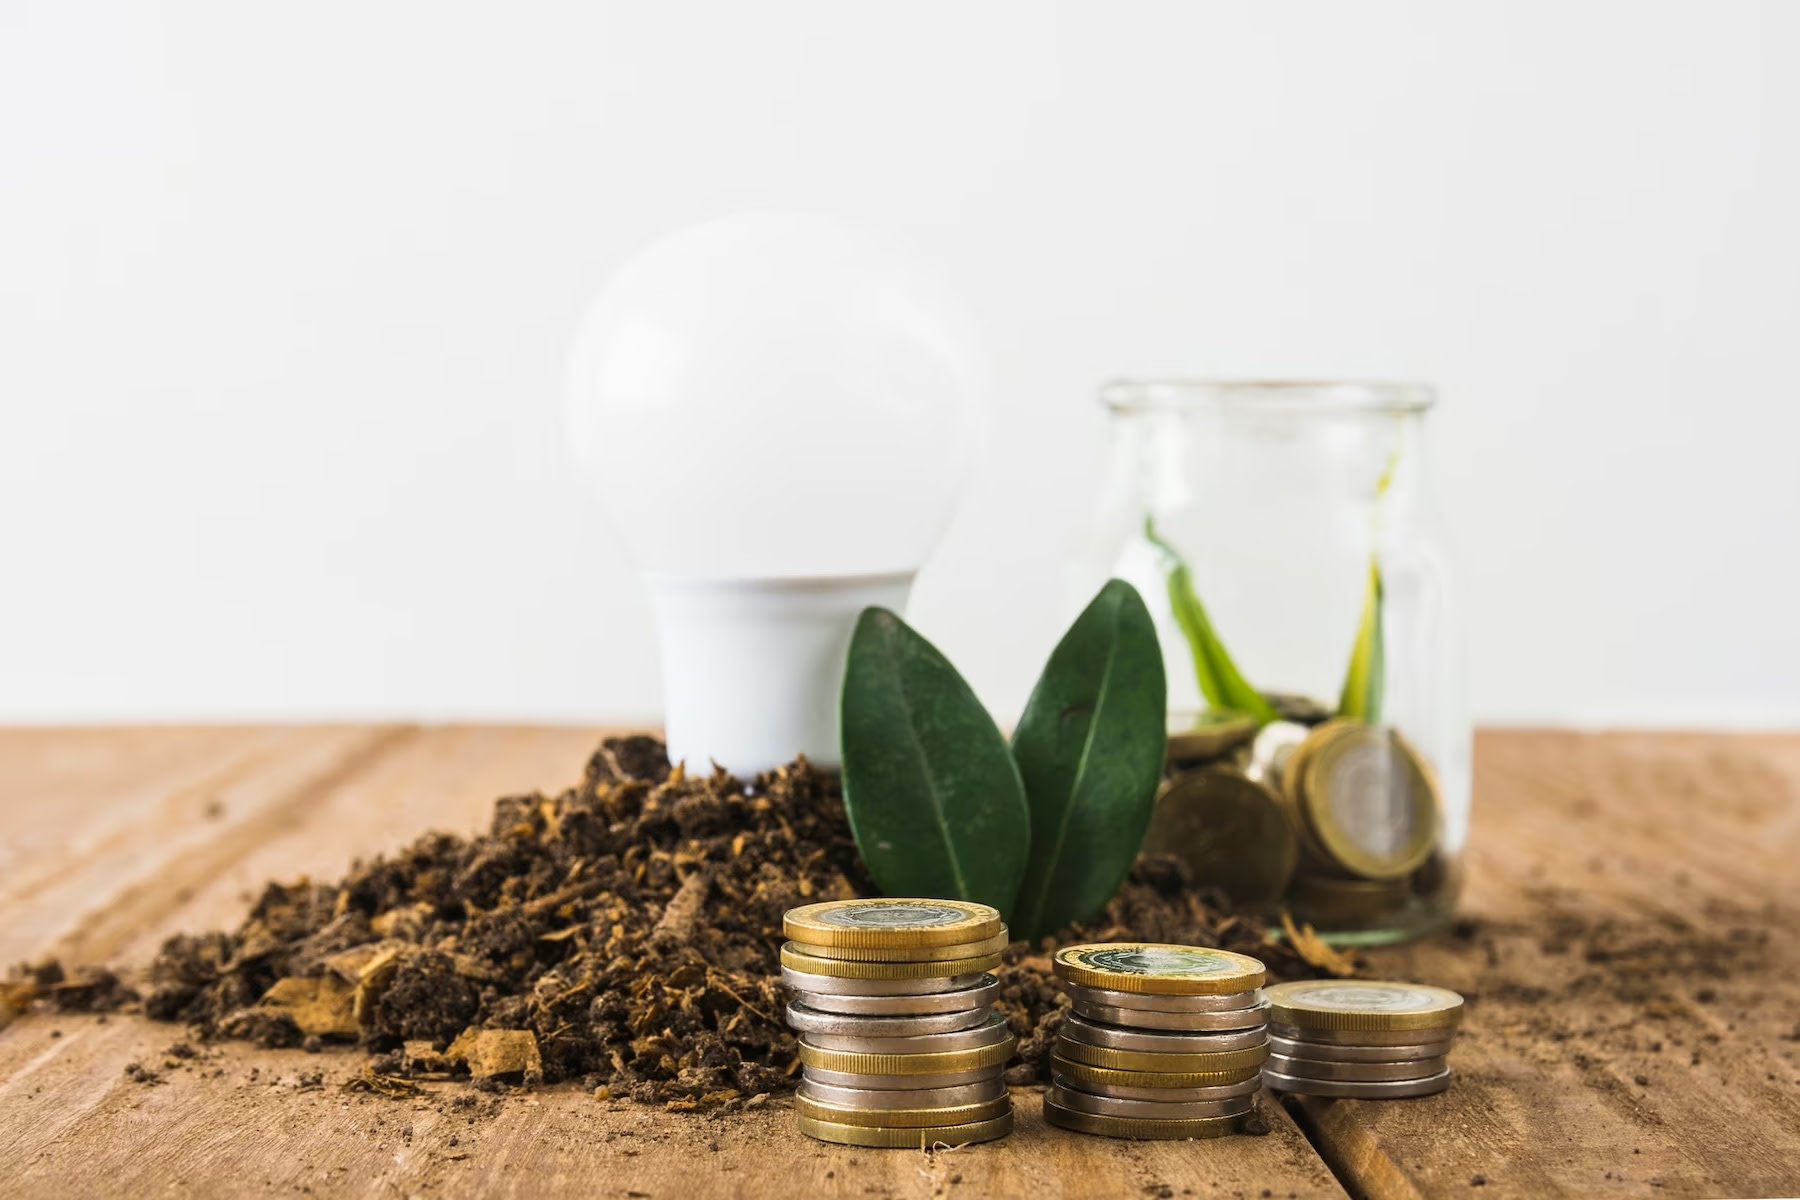 Image of idea light bulb, leaves, and soil next to coins on wooden table